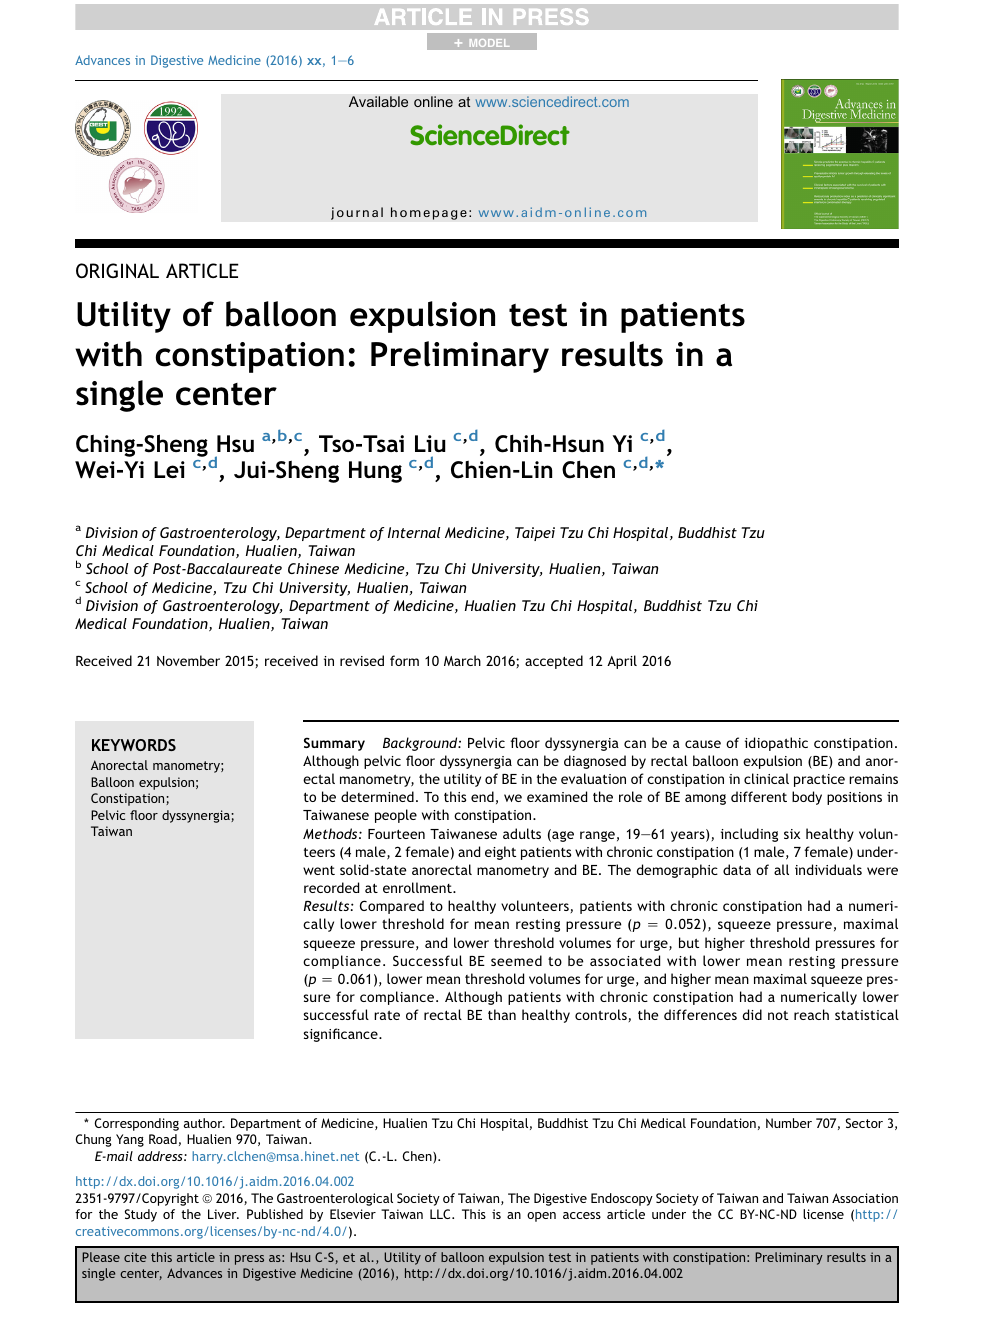 Utility Of Balloon Expulsion Test In Patients With Constipation